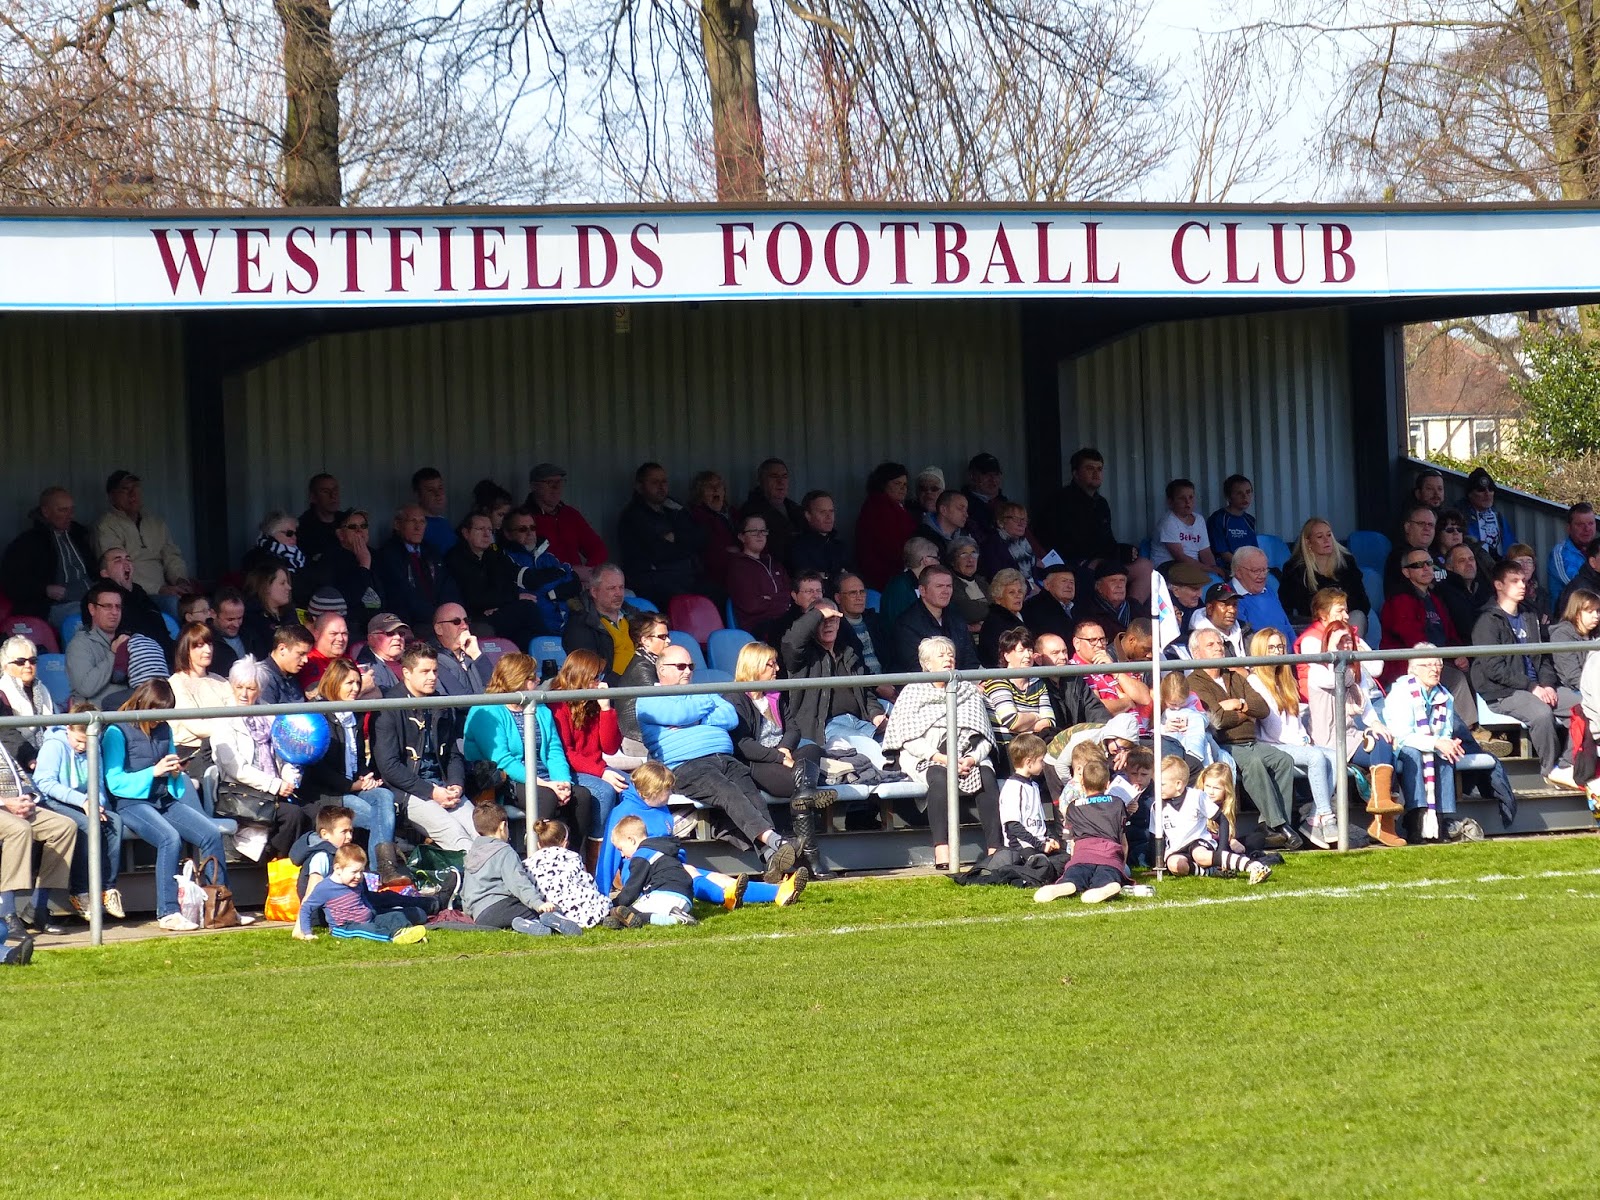 Bulls News: Westfields Get Home Draw In FA Cup